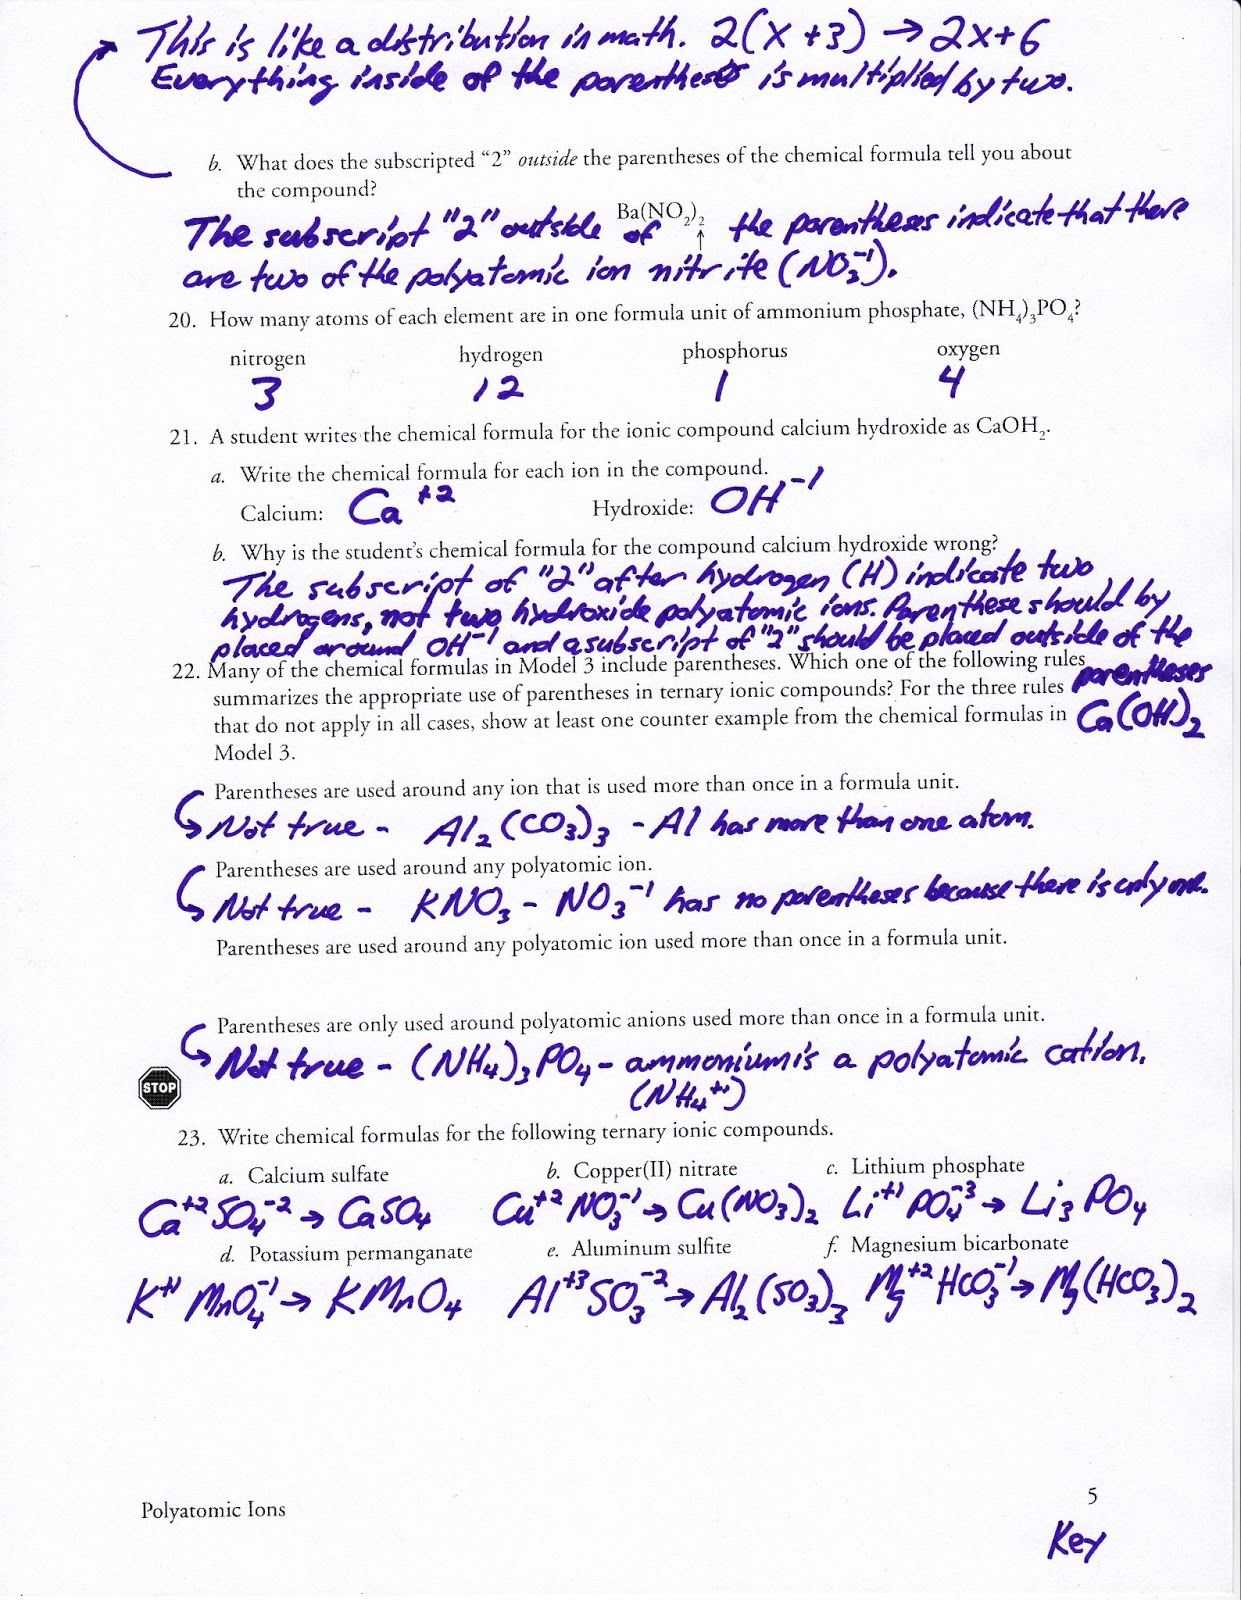 Ionic Compounds Worksheet Answers Also Polyatomic Ions Worksheet Answer Key Things to Wear